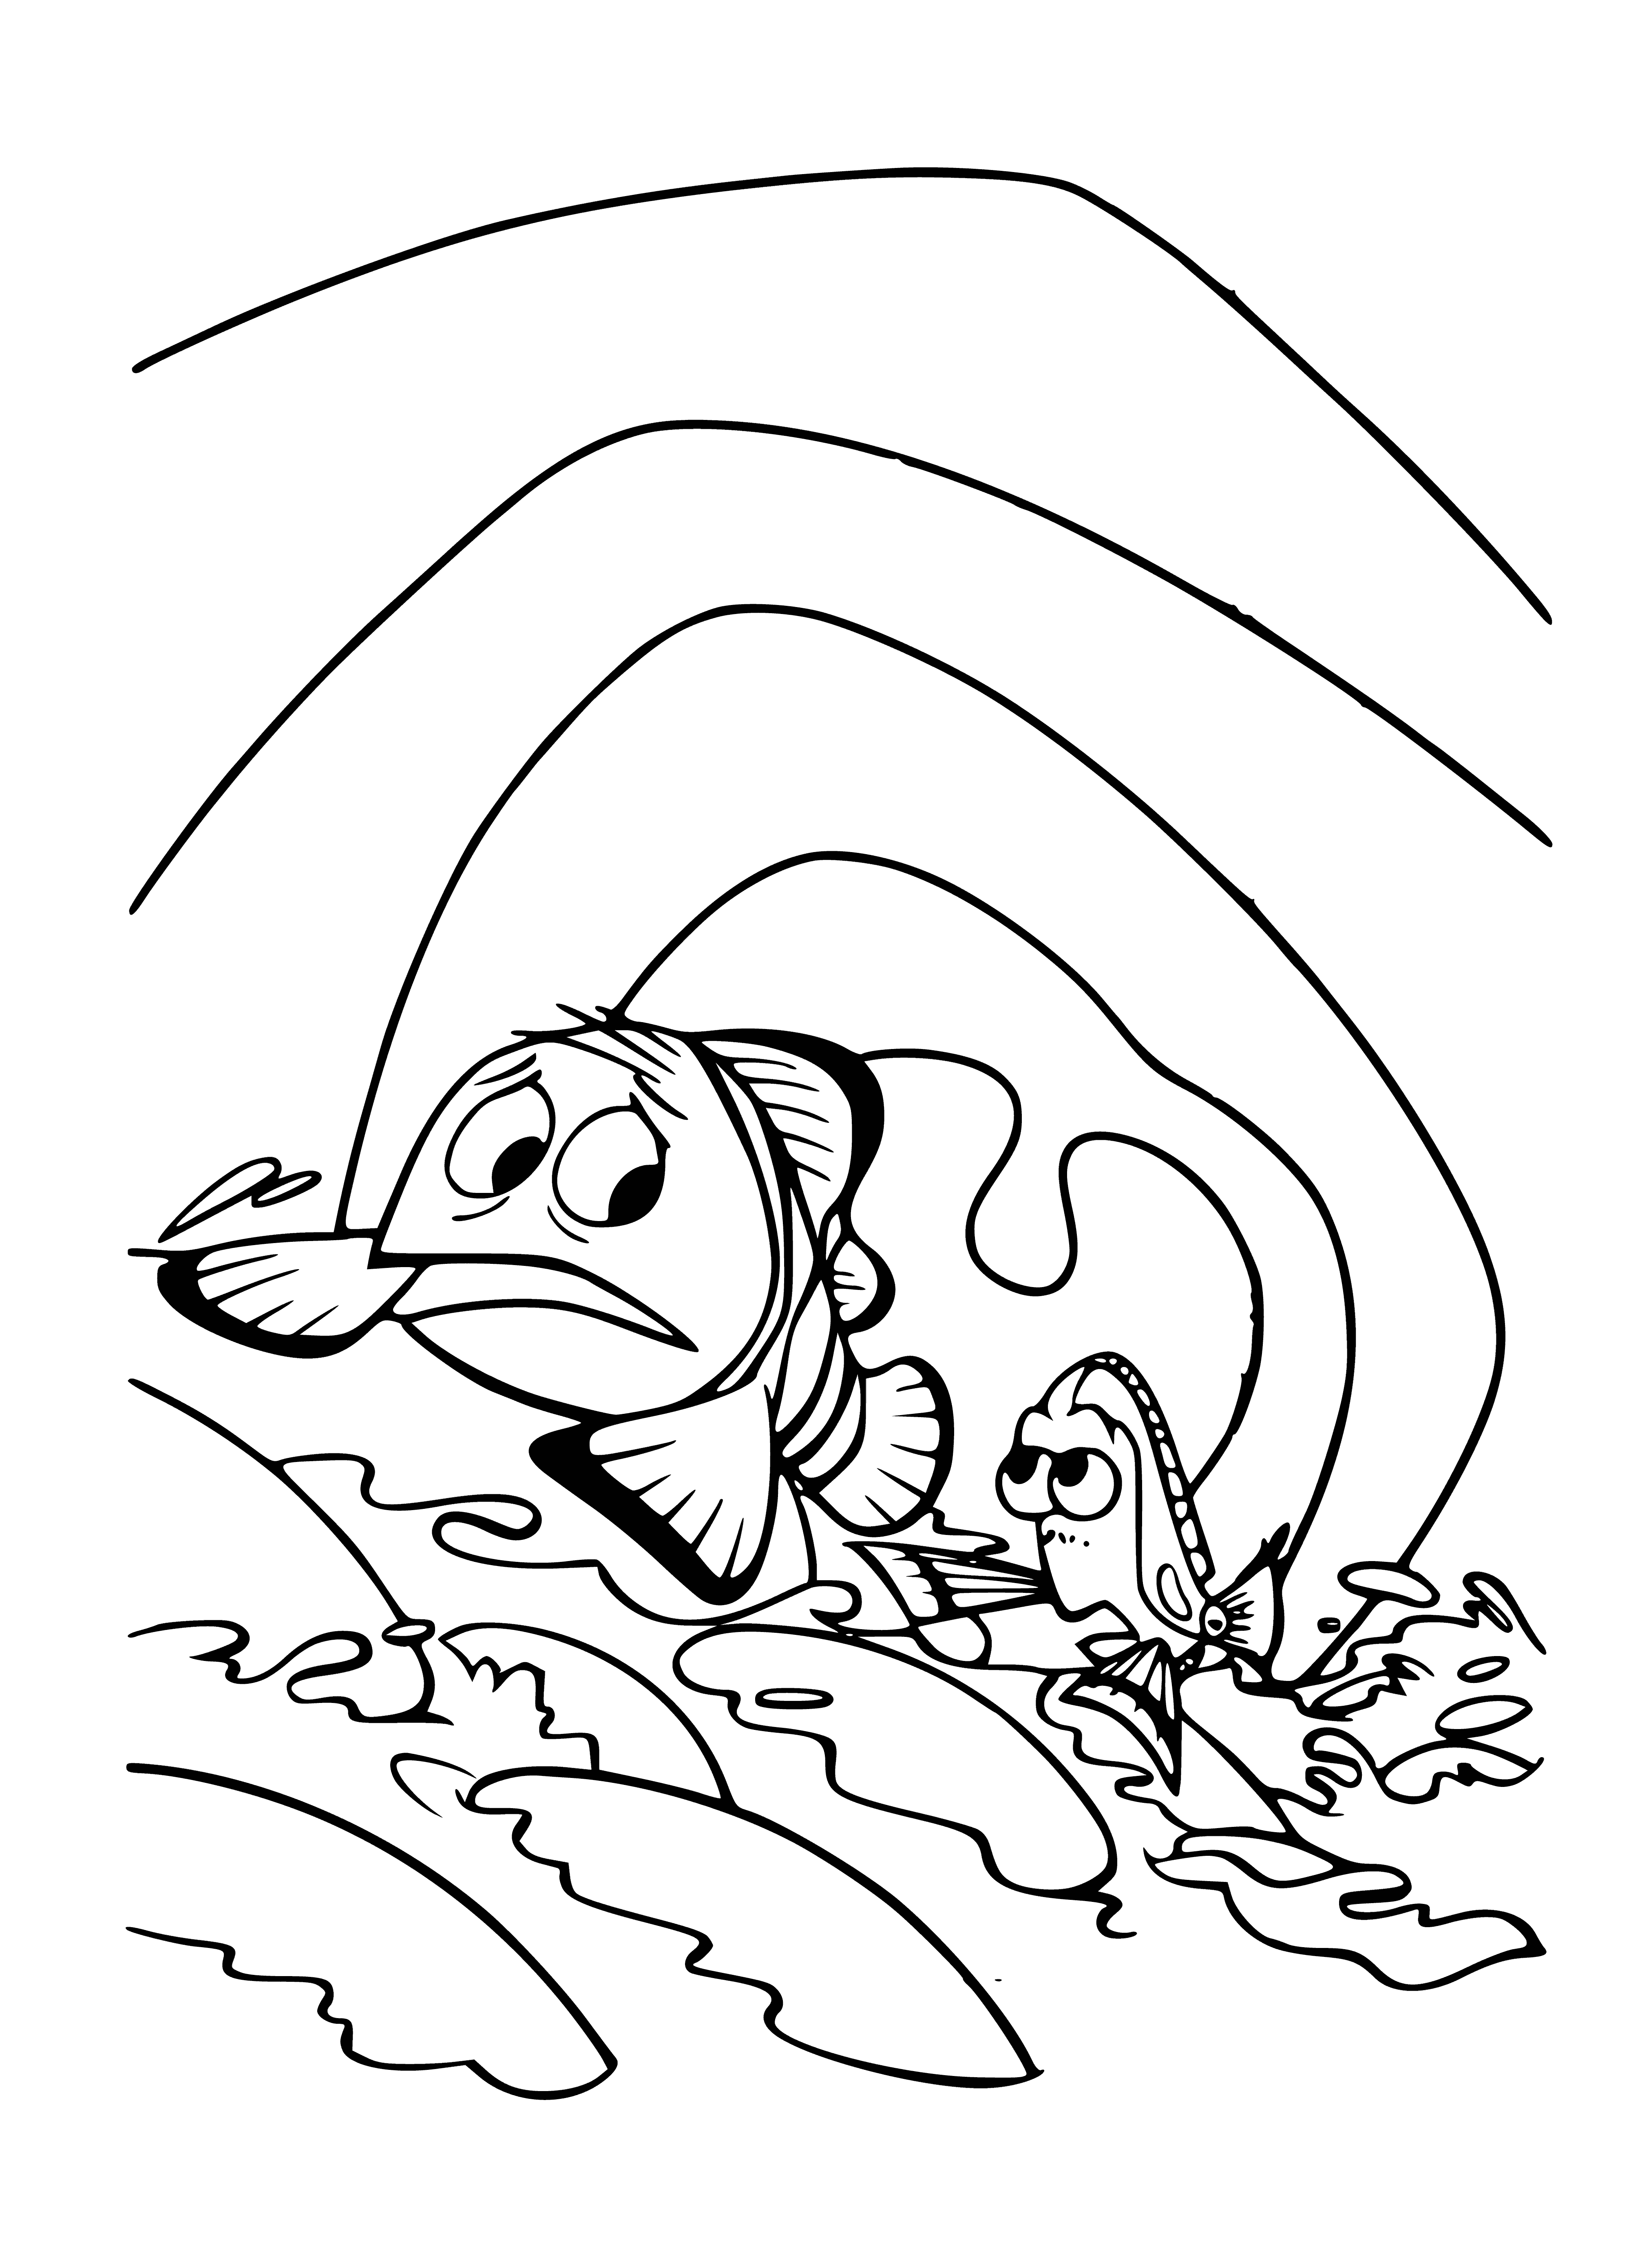 coloring page: Nemo has swum inside the vast whale's mouth and is now lost, looking around the eerie shadows the light casts.